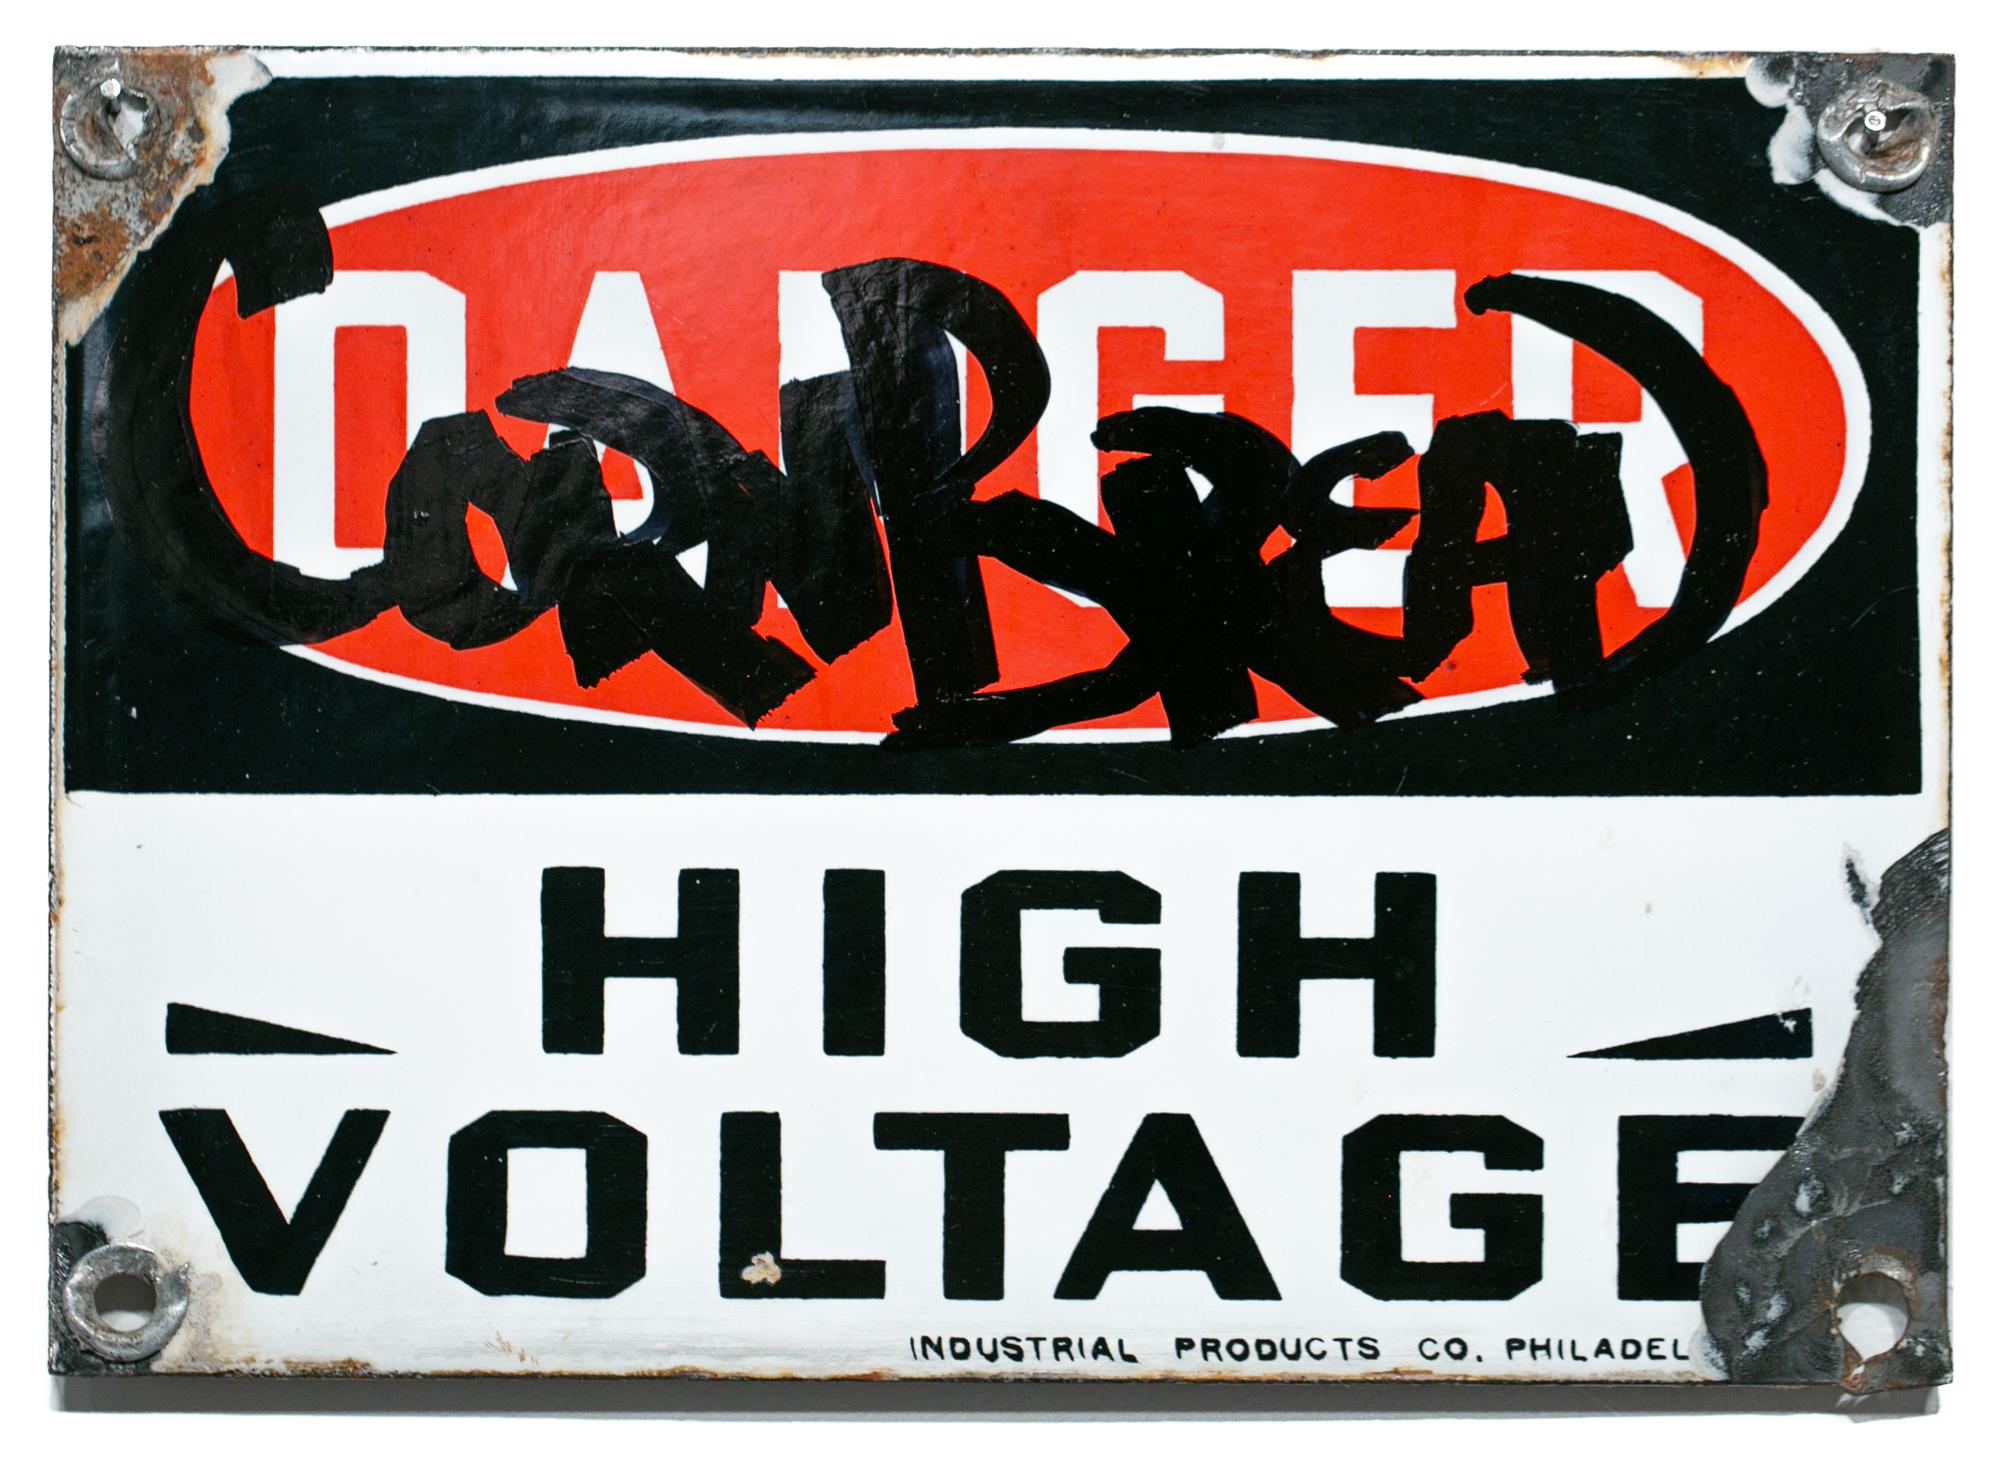 "Cornbread High Voltage" is an original acrylic on ceramic coated sign by Cornbread measuring 7"h x 10"w.

Darryl McCray, known by his tagging name, “Cornbread,” is a graffiti artist from Philadelphia, credited with being the first modern graffiti